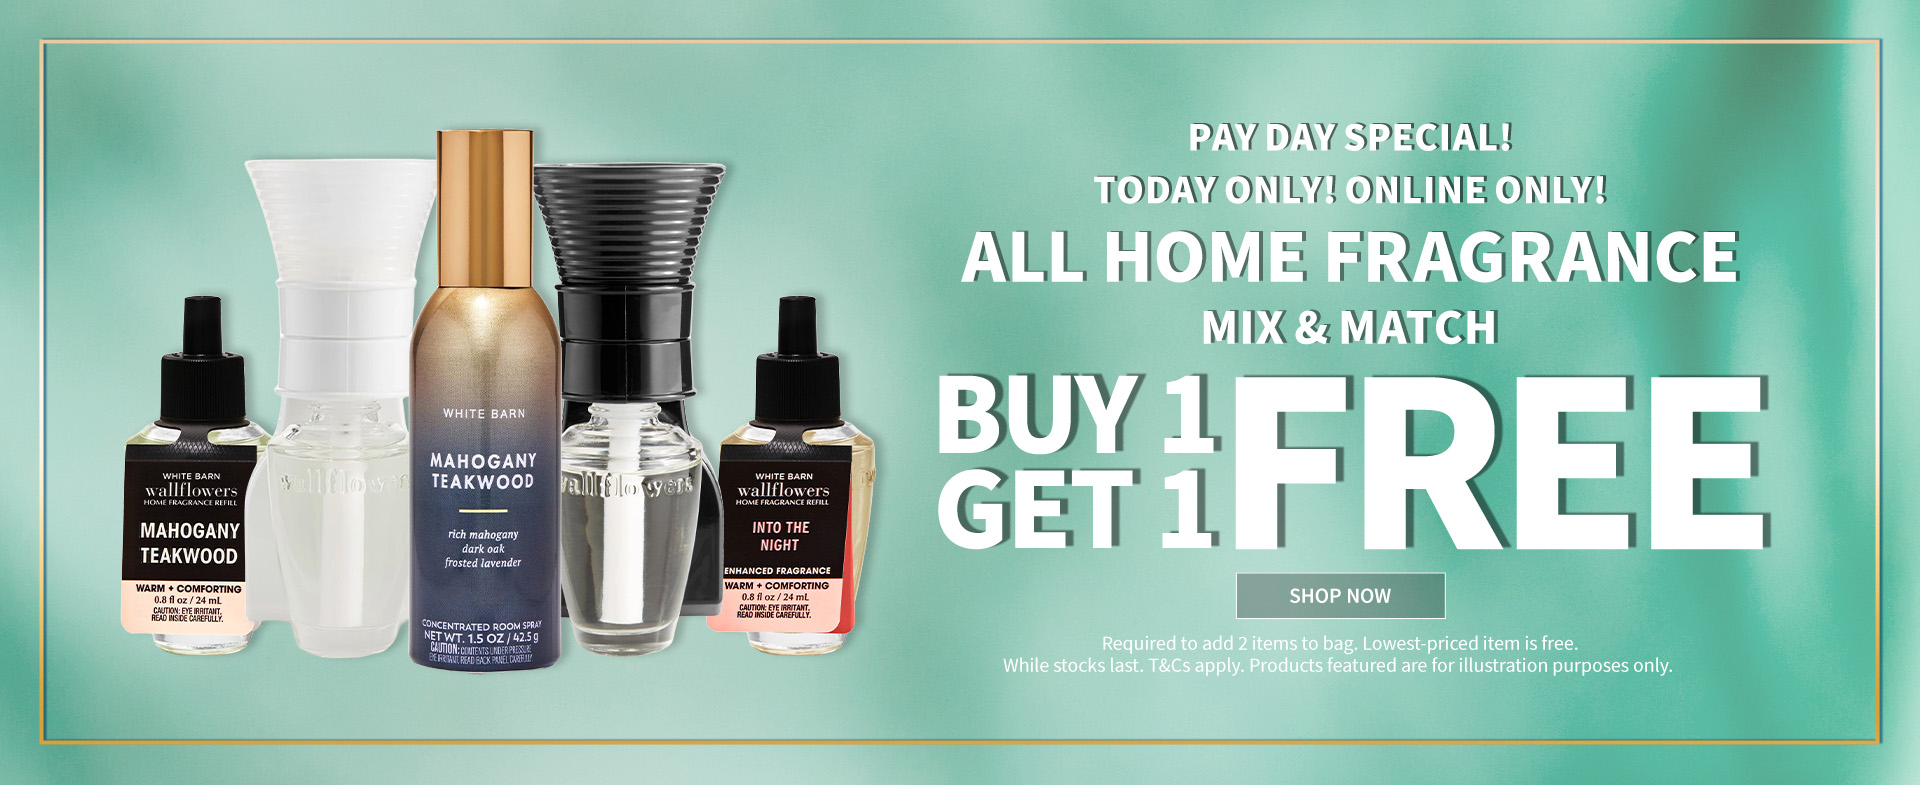 AY DAY SPECIAL! TODAY ONLY! ONLINE ONLY! ALL HOME FRAGRANCE MIX & MATCH B1G1F